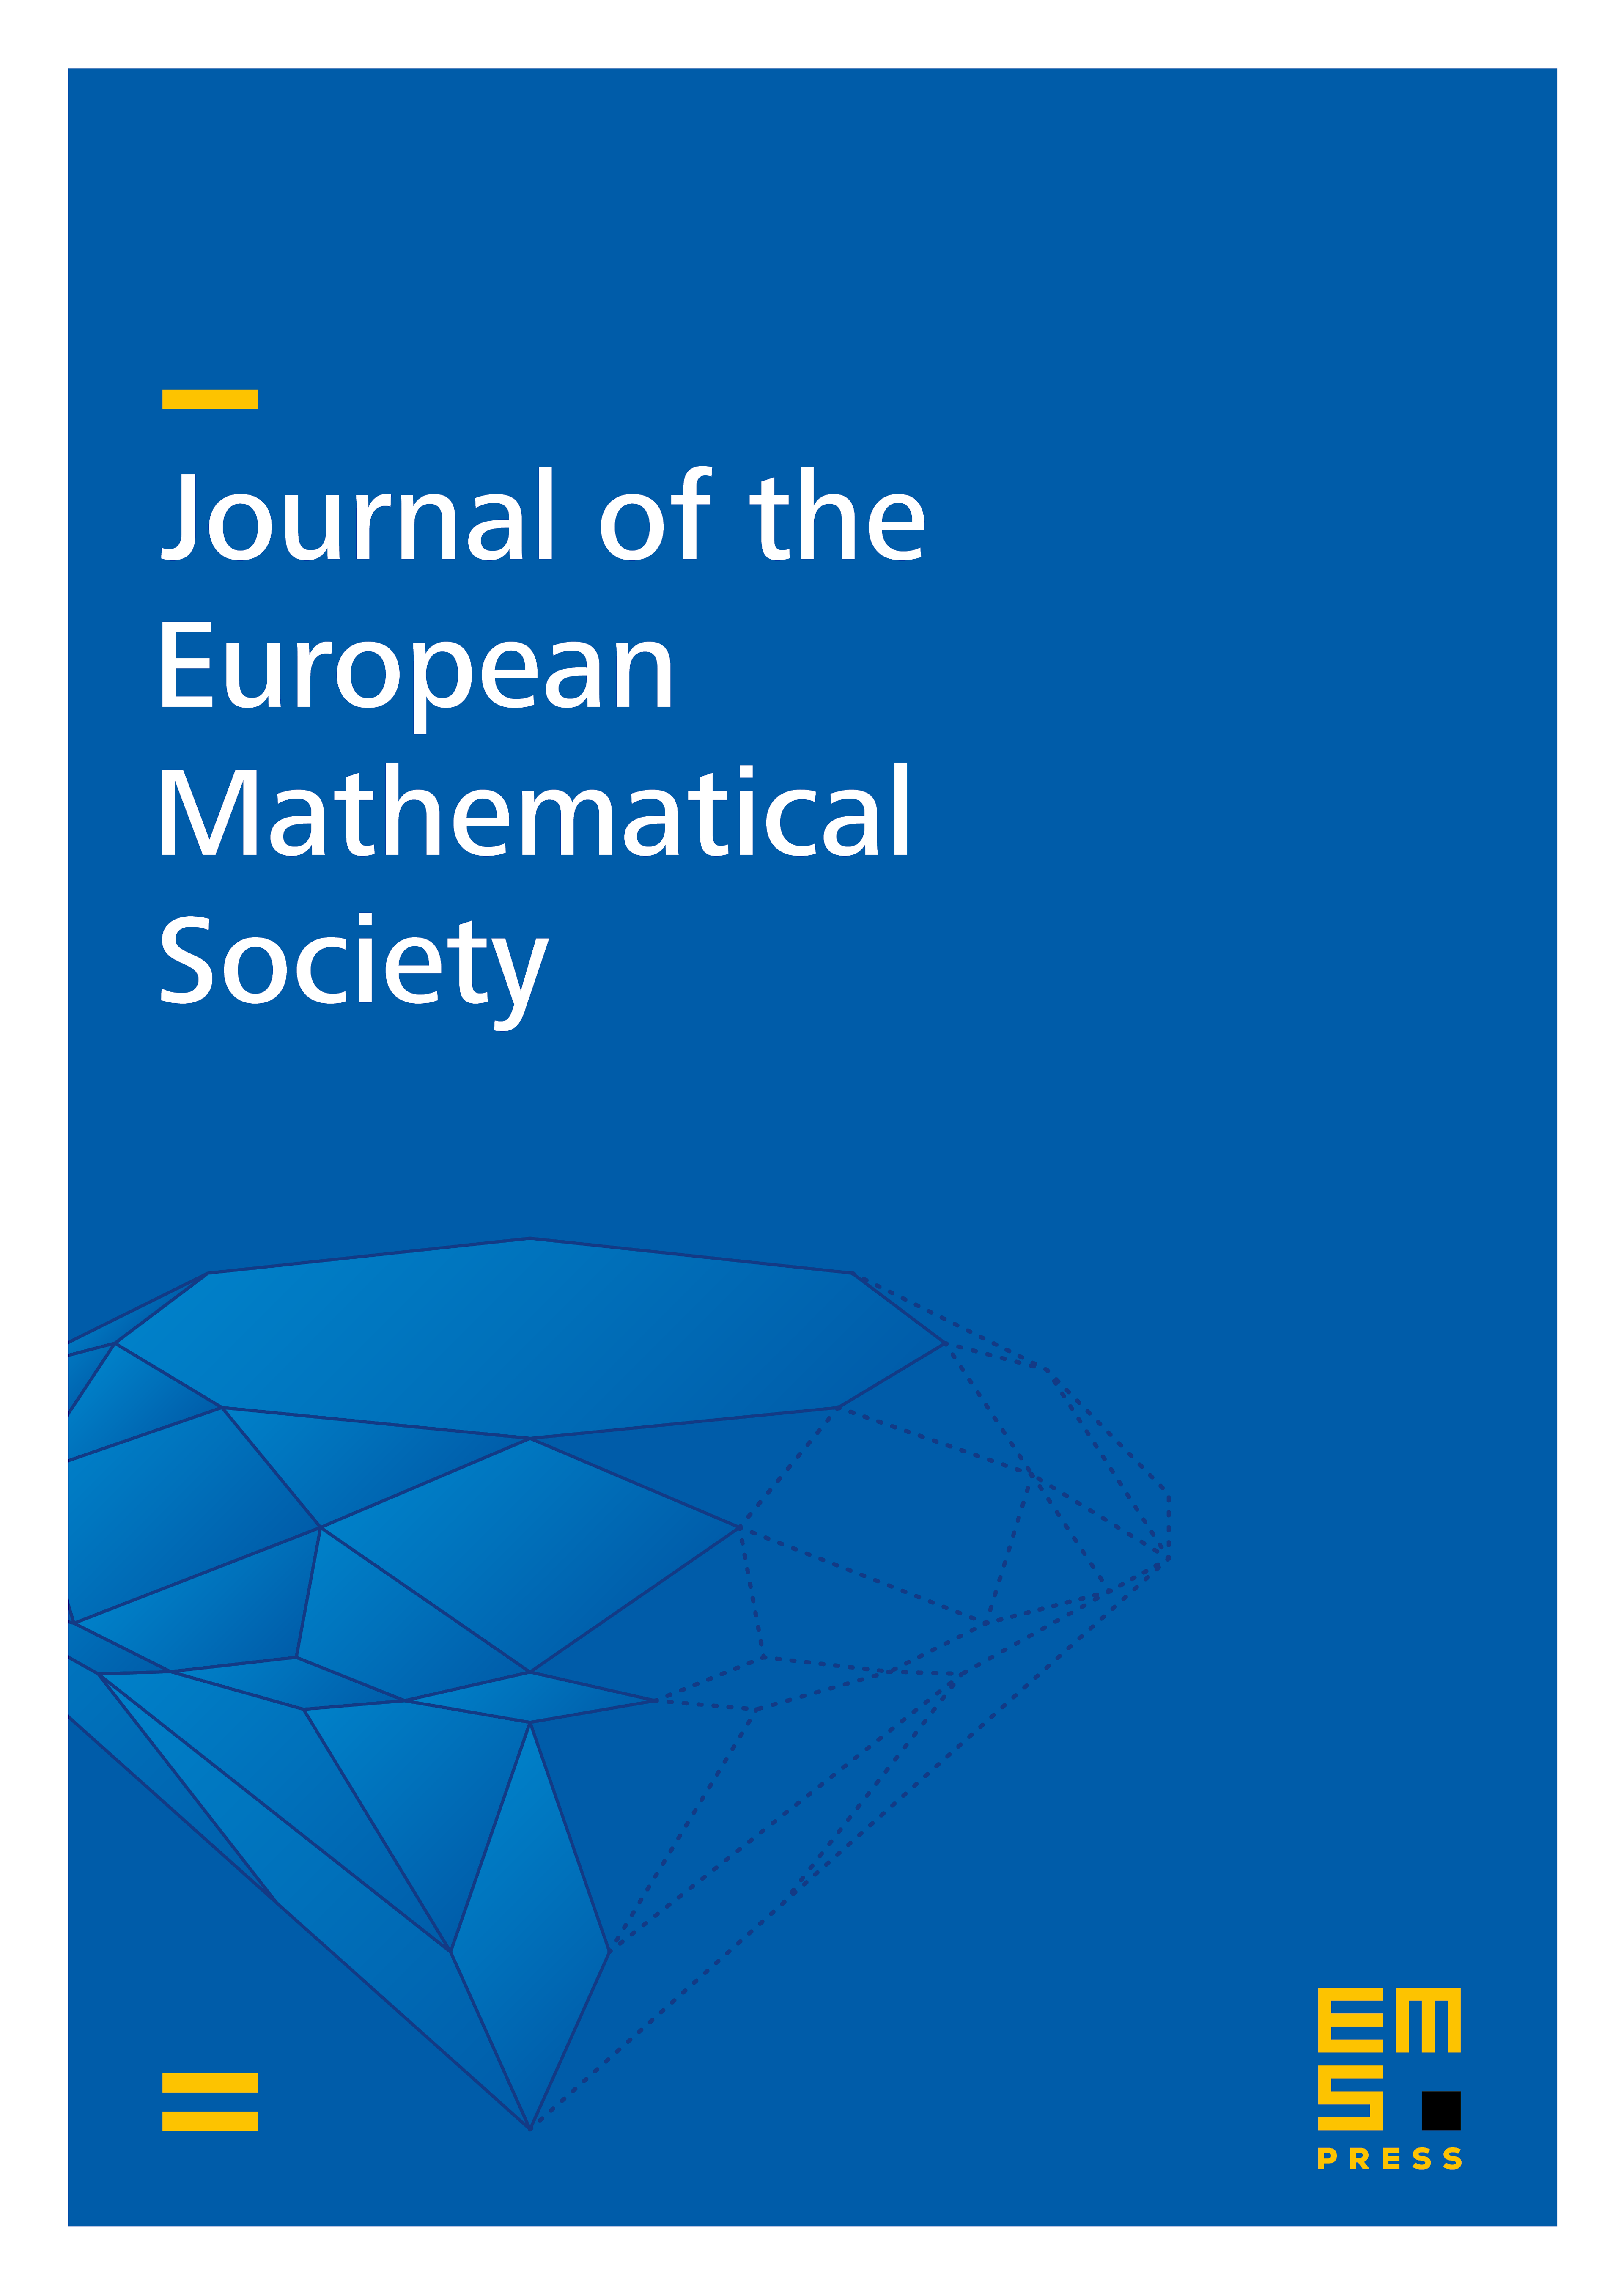 Centro-affine differential geometry and the log-Minkowski problem cover